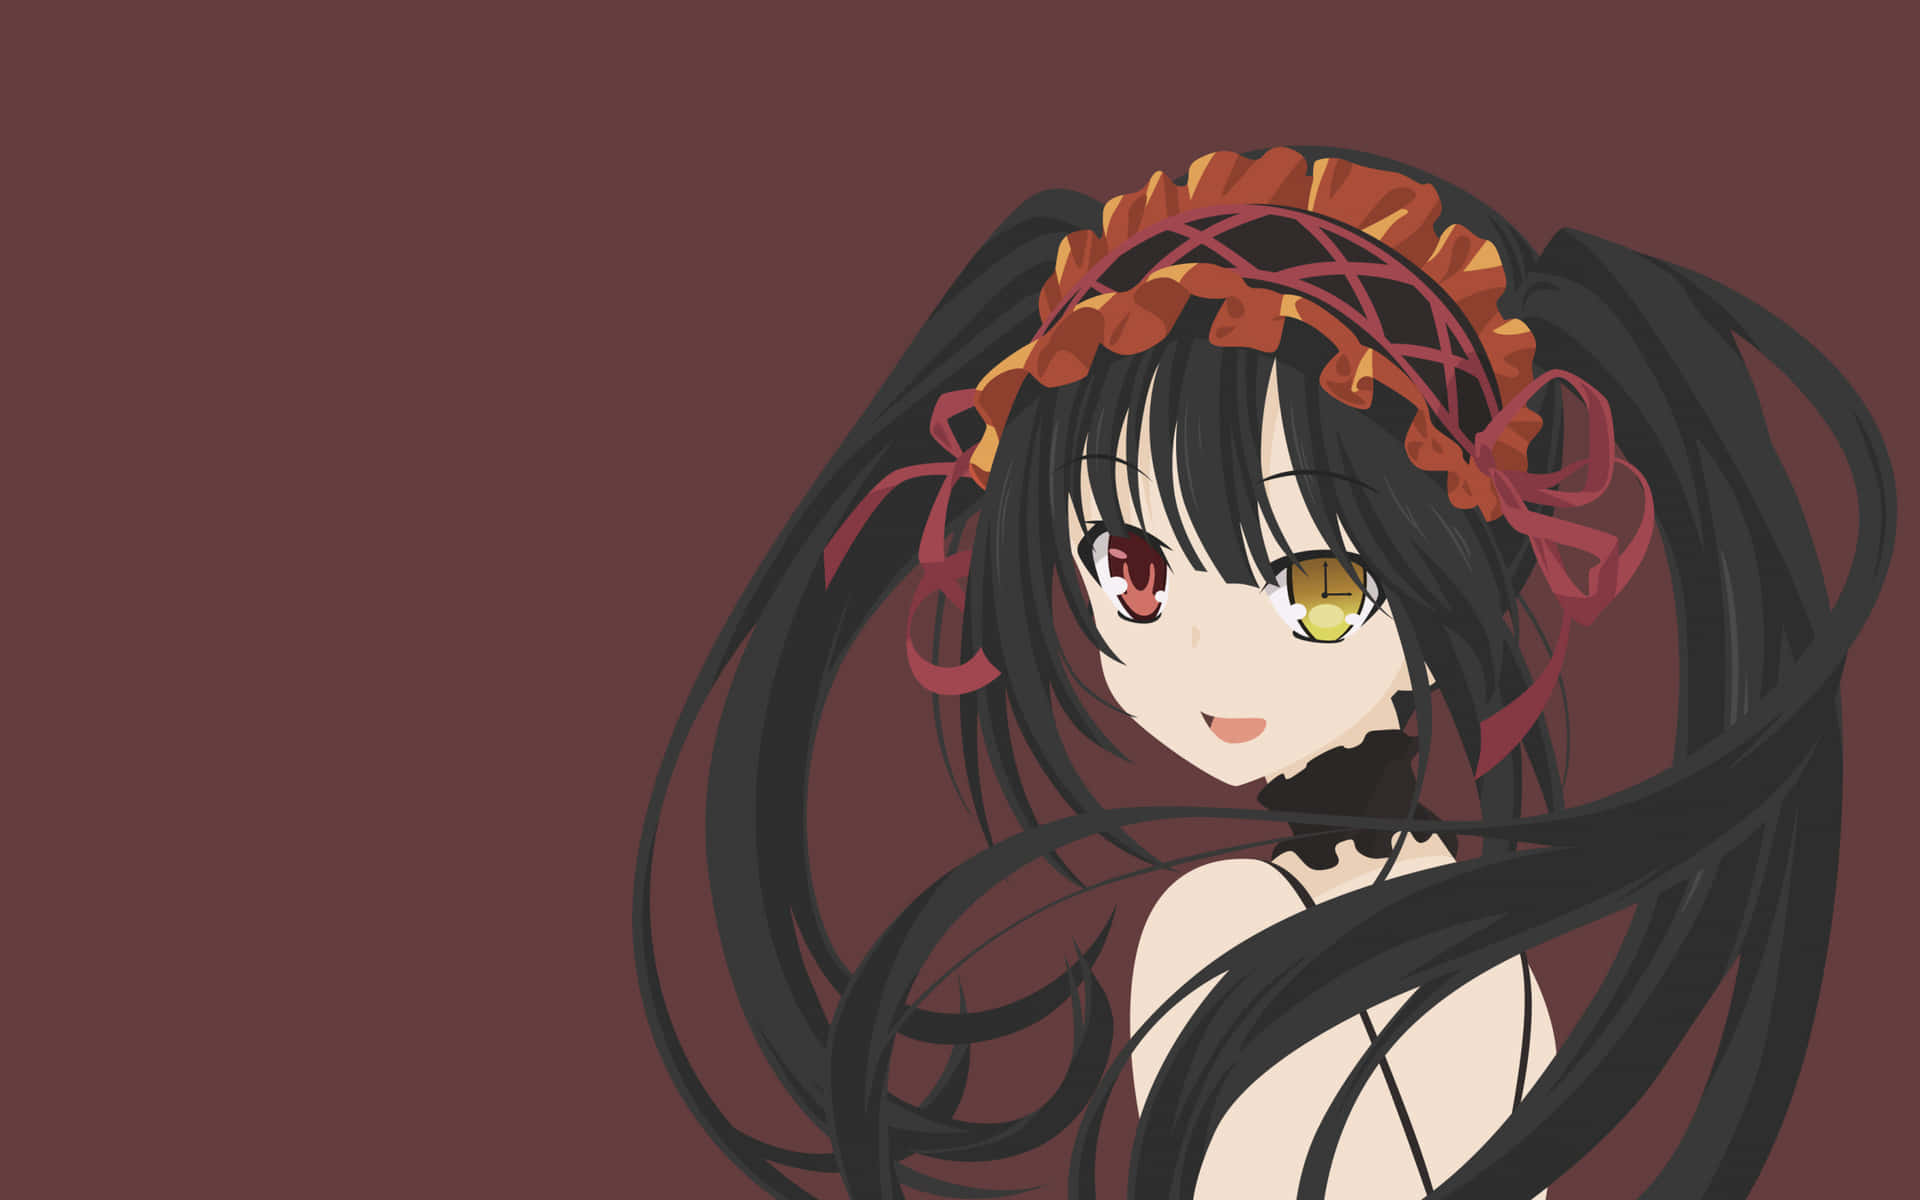 Anime Girl With Red Eyeand Floral Headpiece Wallpaper